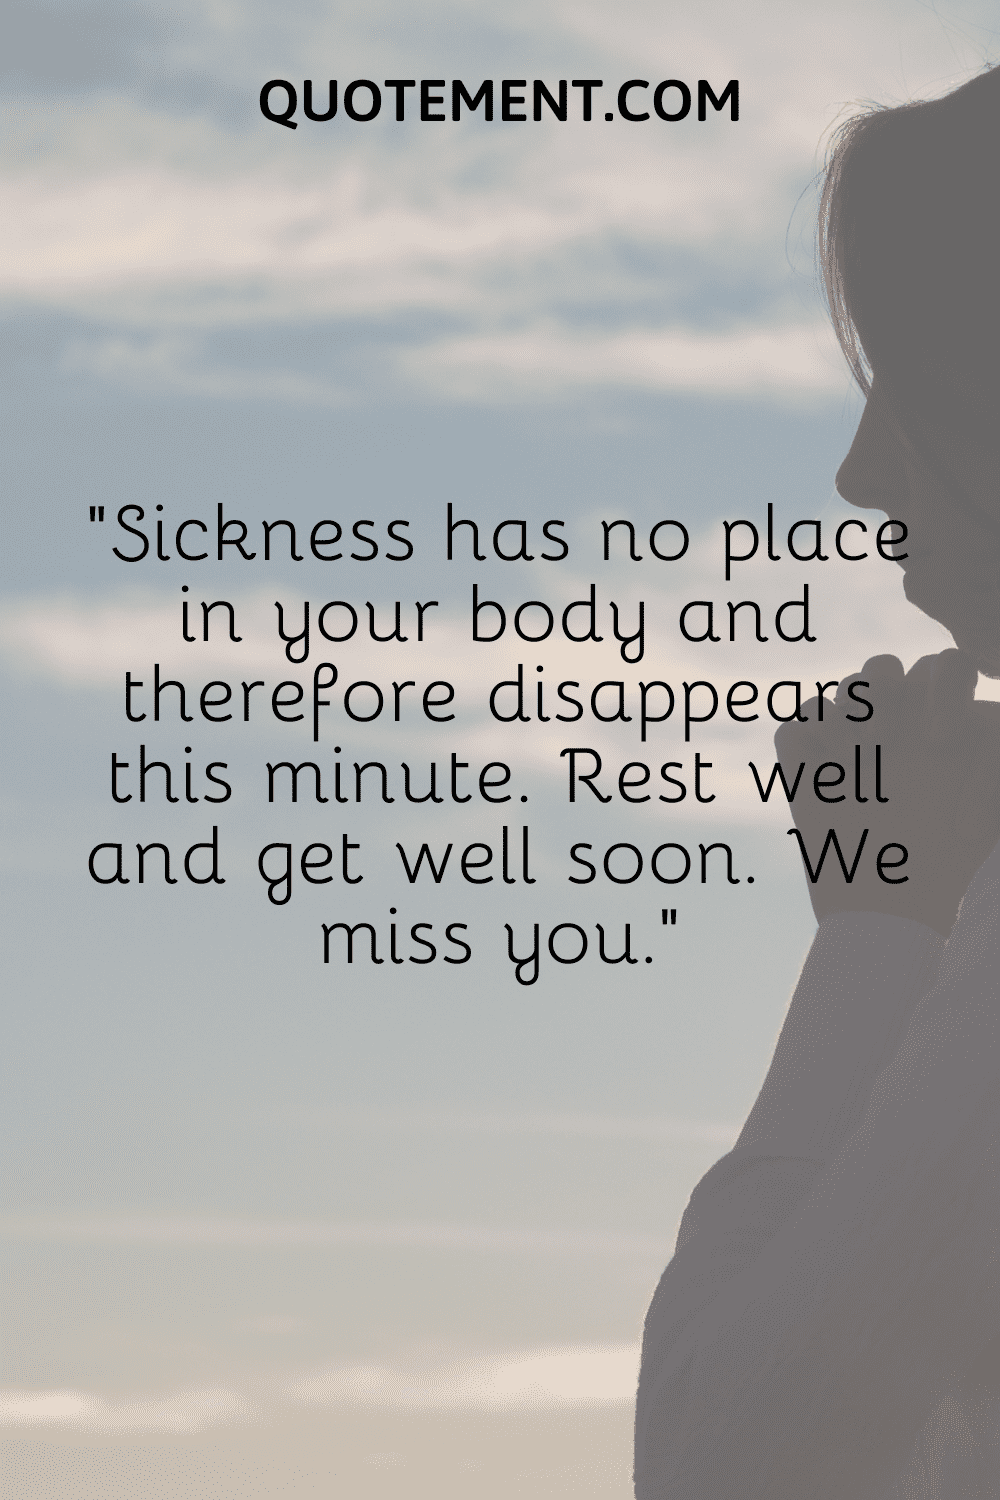 Sickness has no place in your body and therefore disappears this minute